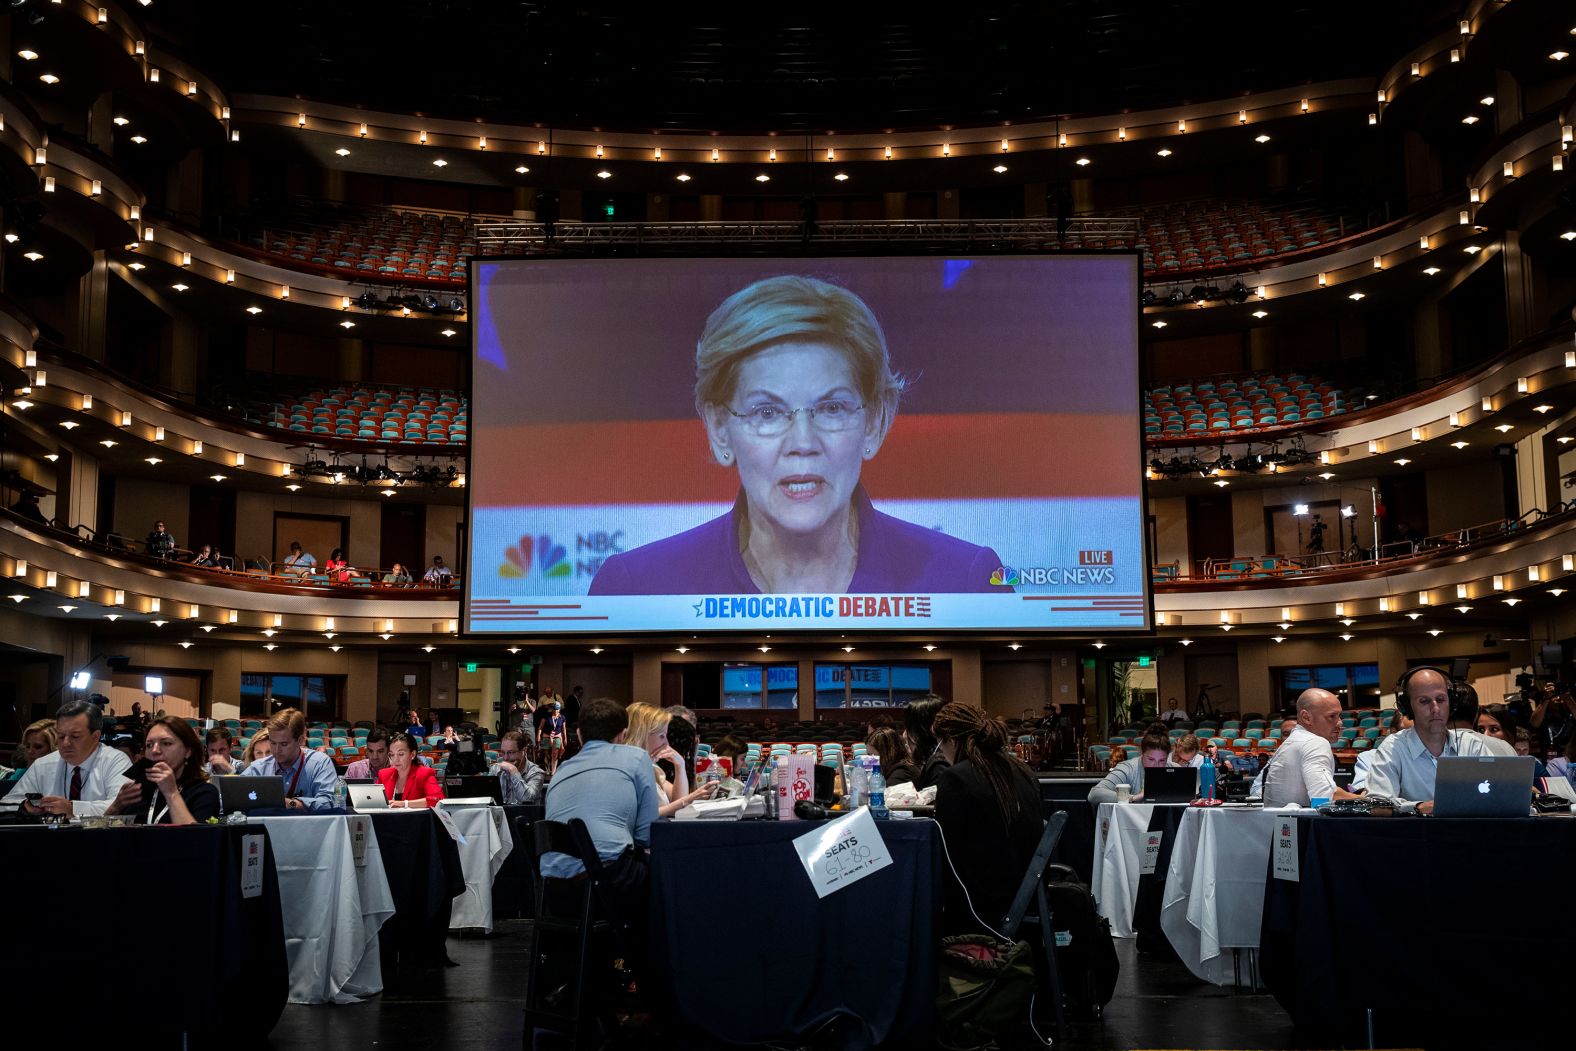 Warren is displayed on a monitor inside the spin room at the Arsht Center. The US senator from Masschusetts is <a href="index.php?page=&url=https%3A%2F%2Fwww.cnn.com%2Fpolitics%2Flive-news%2Fdemocratic-debate-june-26-2019%2Fh_f7eb98576555e7400b94bb91b965b44b" target="_blank">the only candidate from Wednesday's debate who is polling above 5%.</a> She became a progressive star by taking on Wall Street after the 2007 financial crisis.